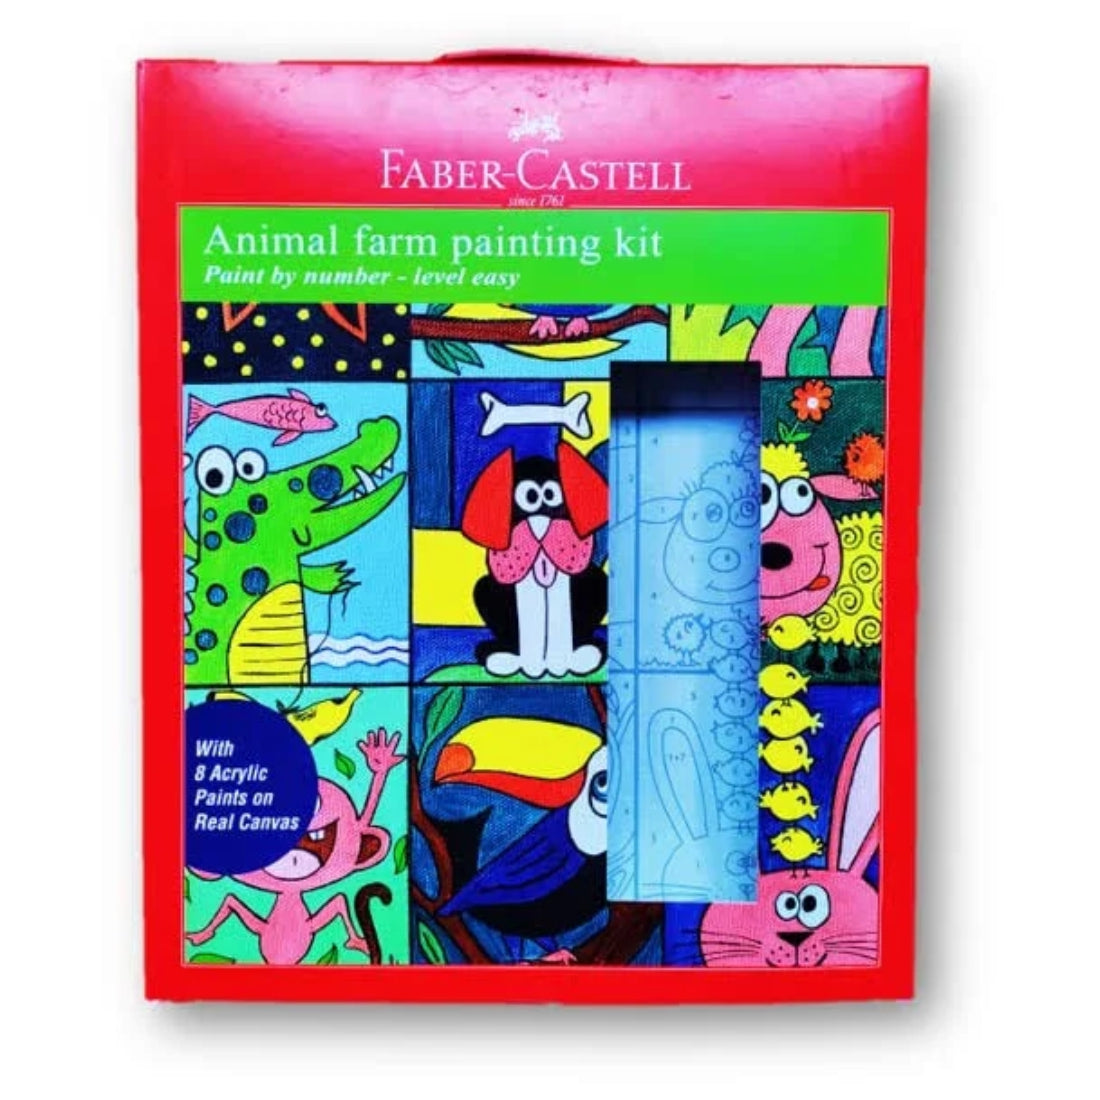 Faber Castell Painting Kit